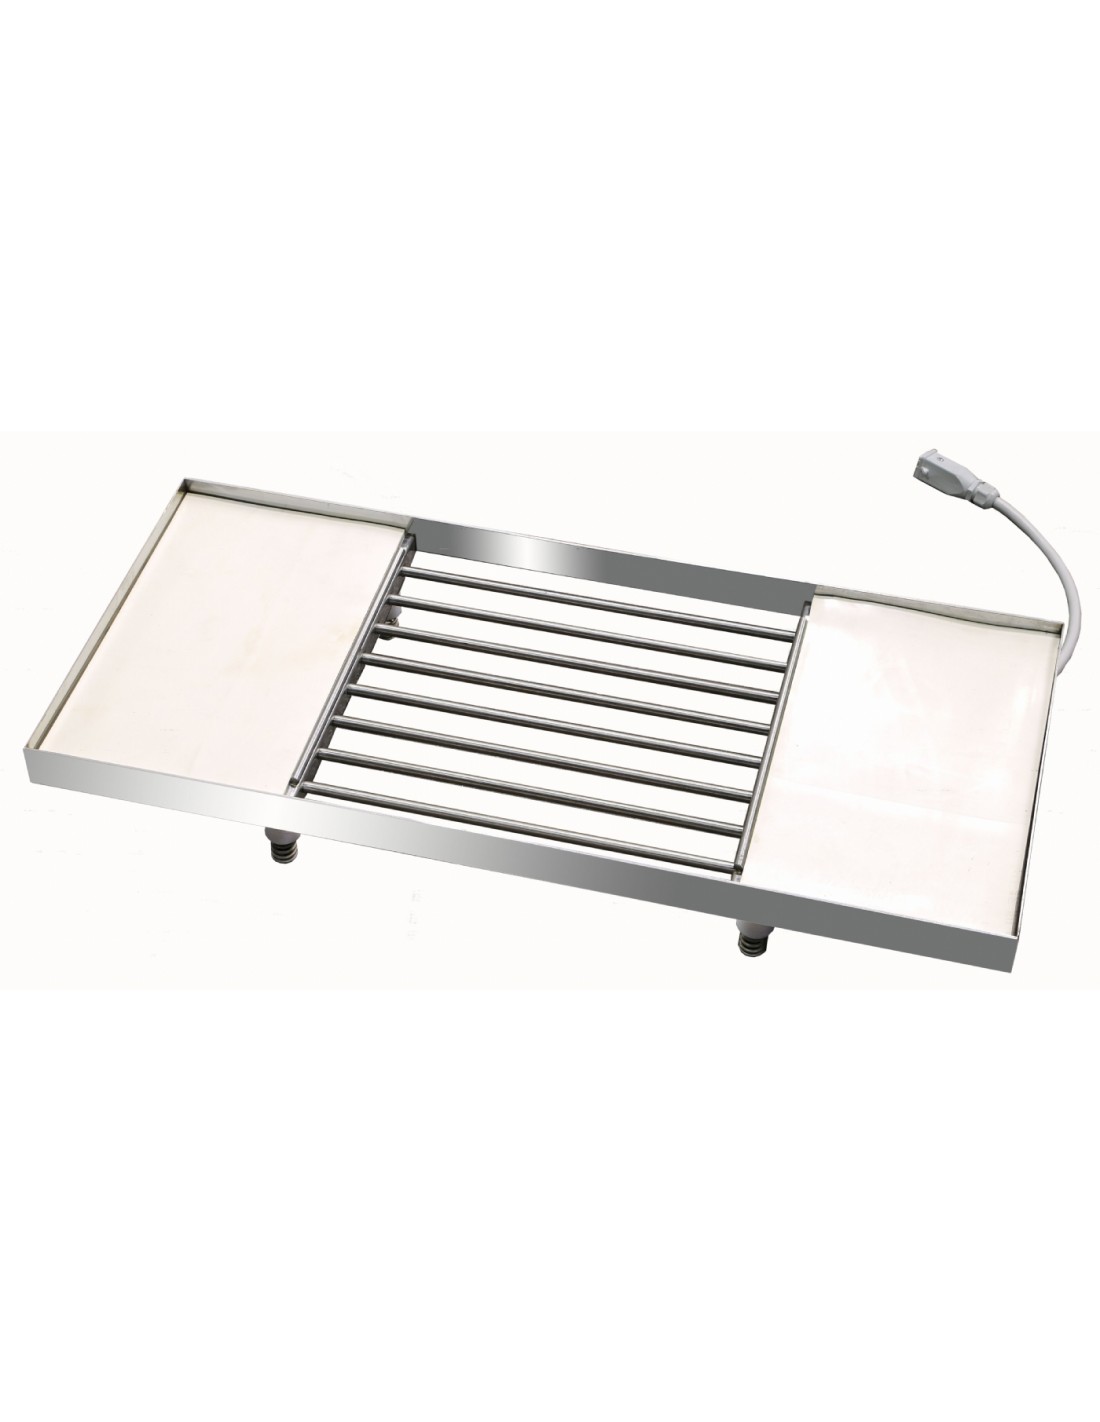 Heated vibrating table